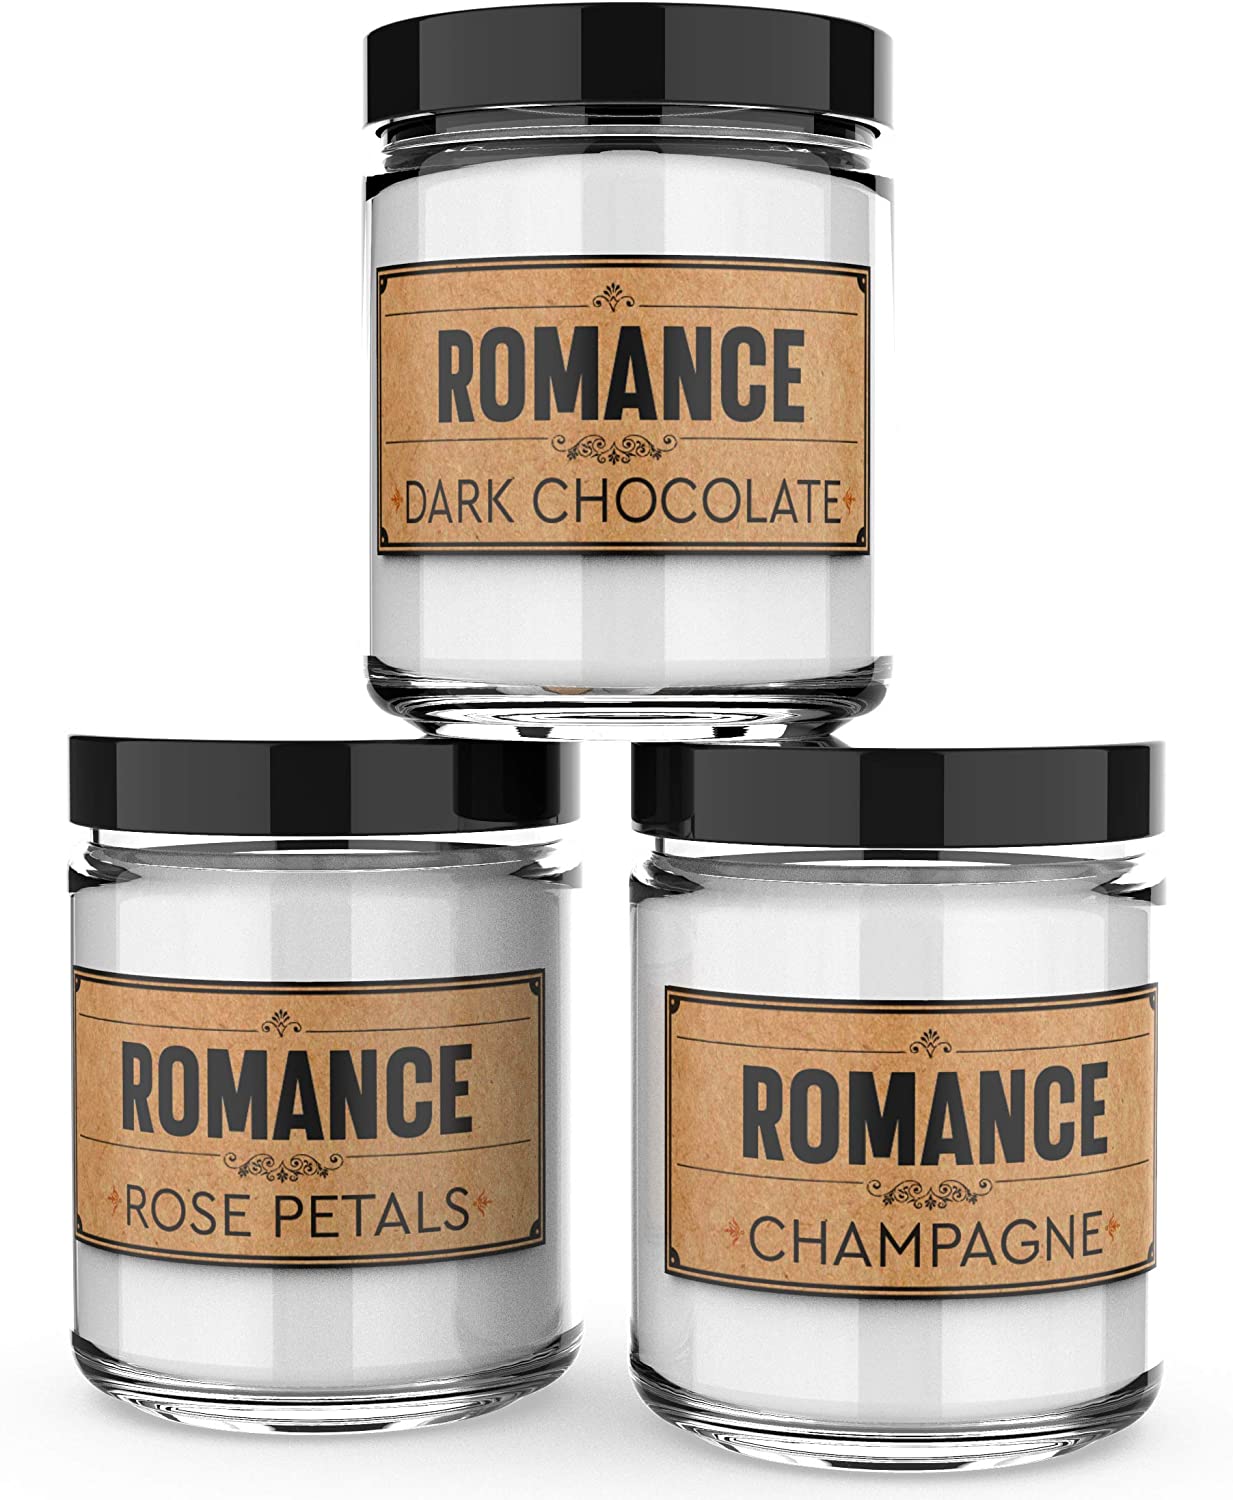 Romantic Gift Ideas for Girlfriend’s Birthday - Romance Scented Candles
